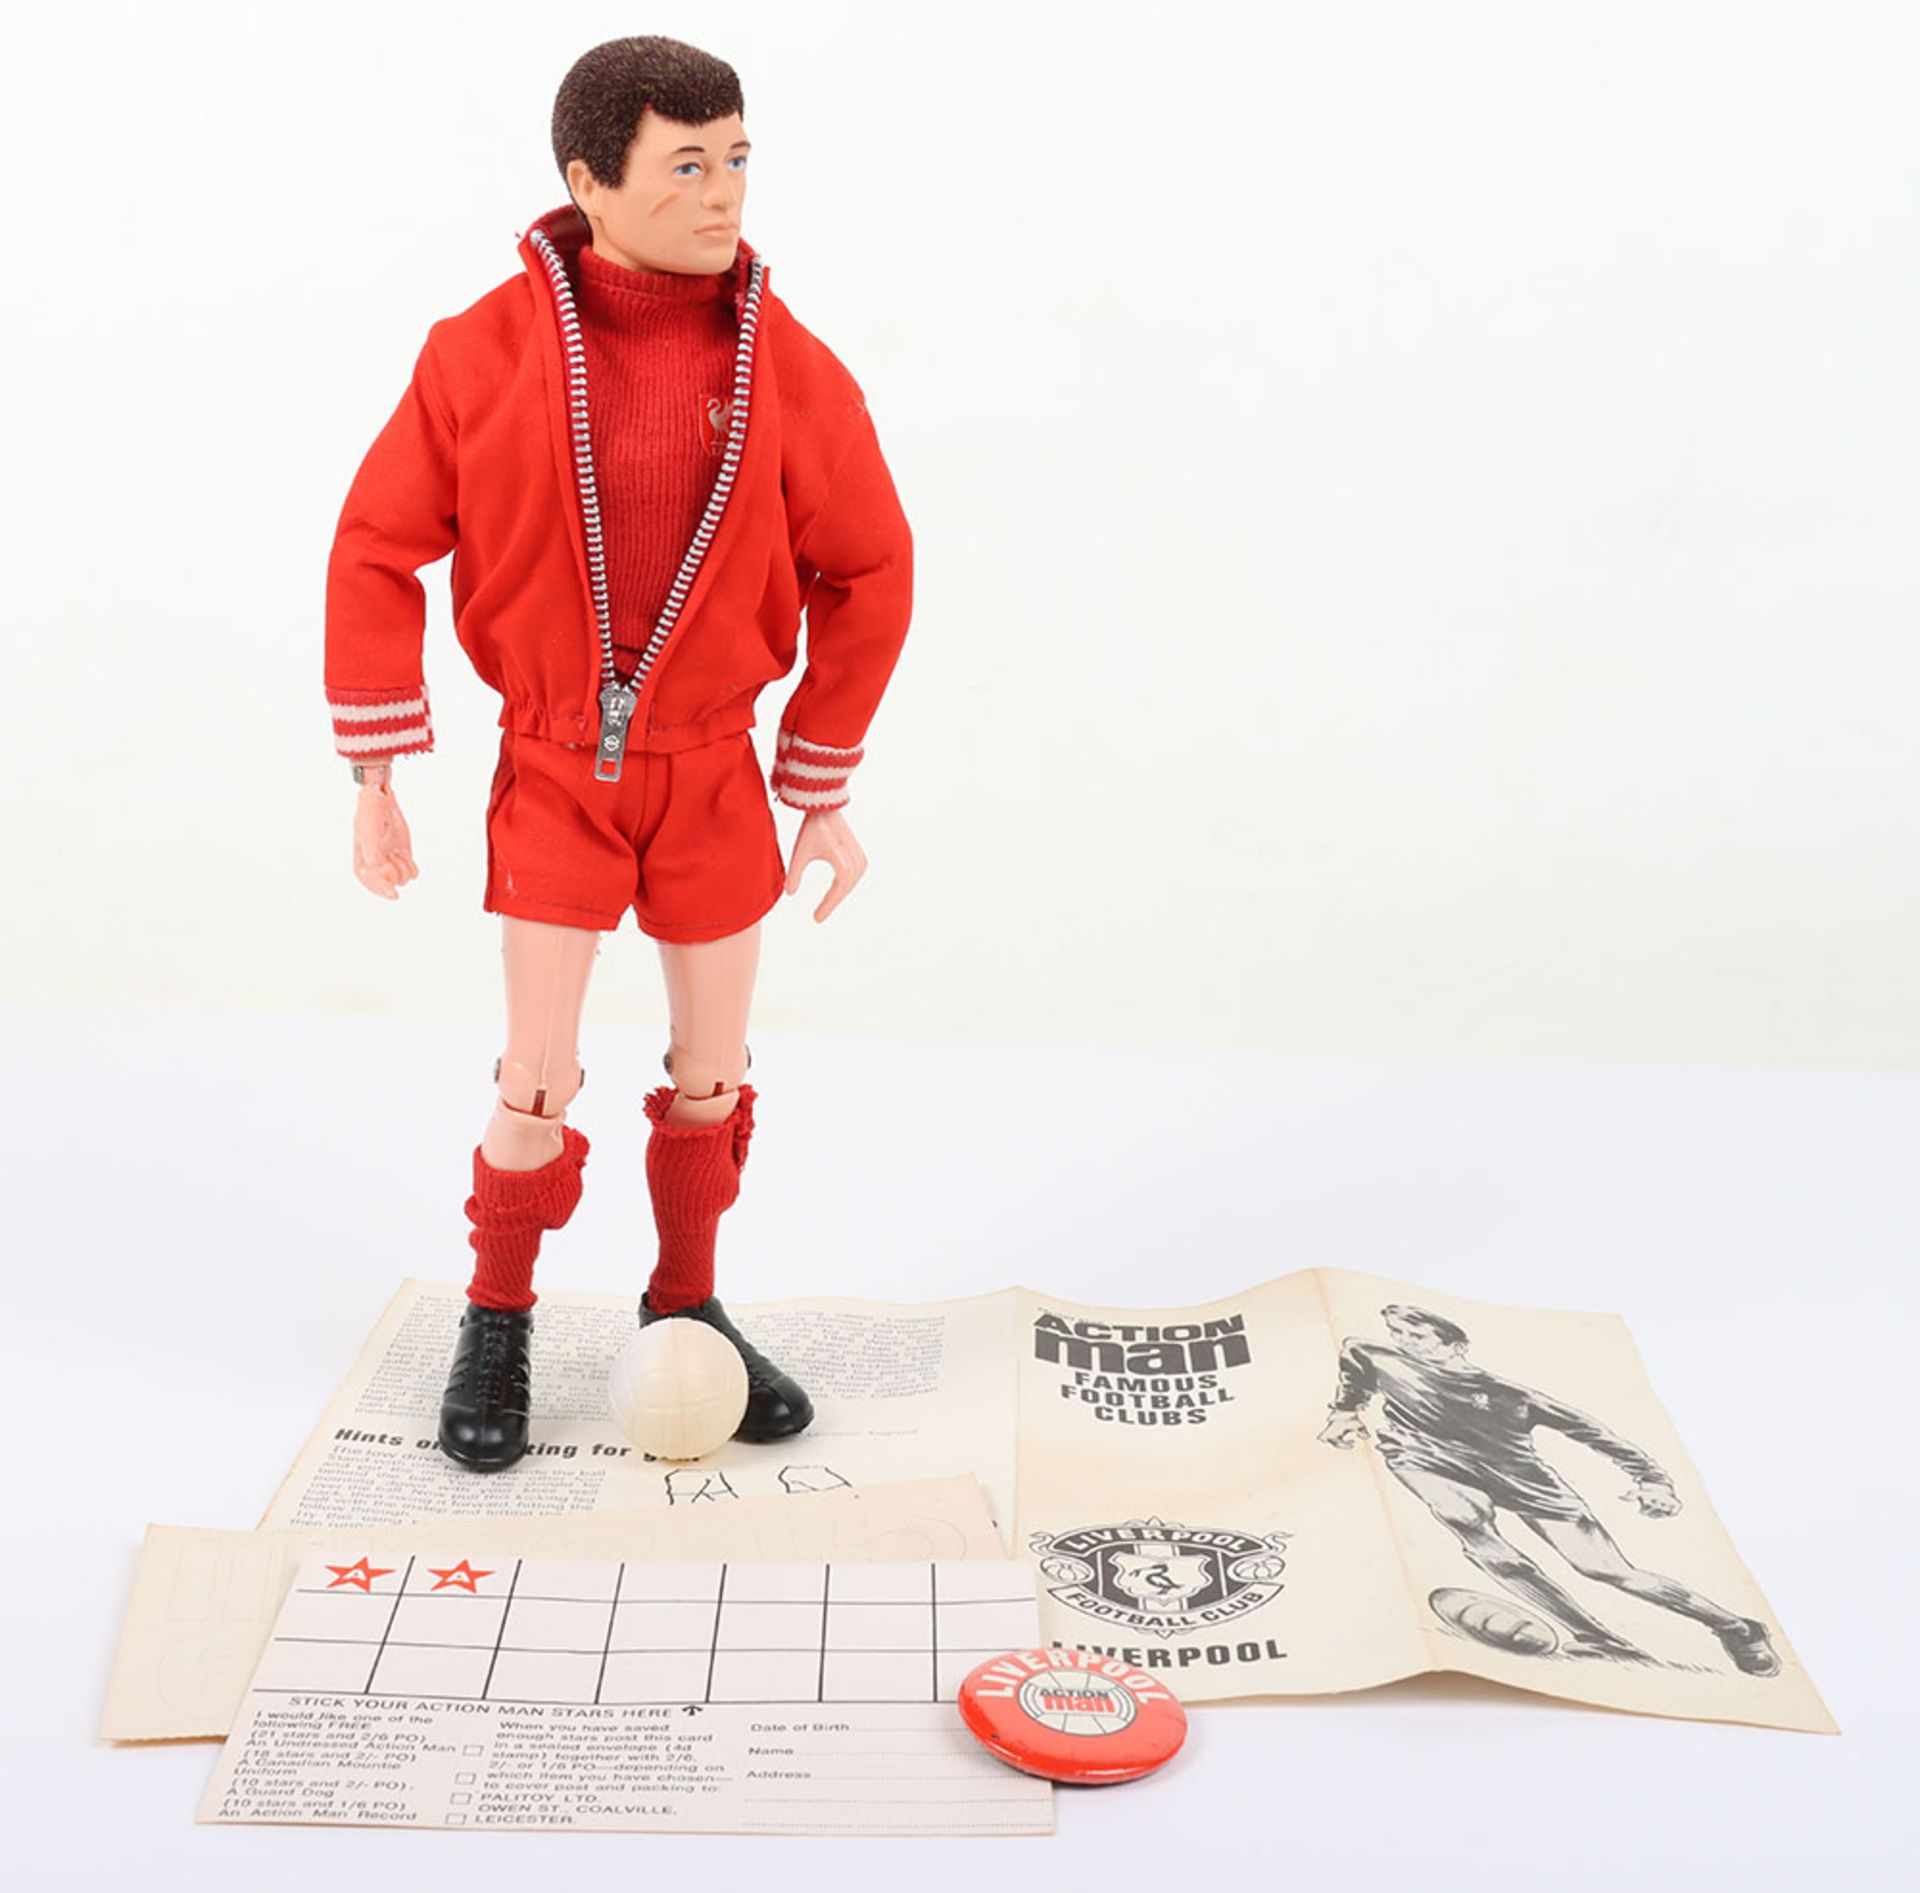 Vintage Action Man Famous Football Clubs Liverpool